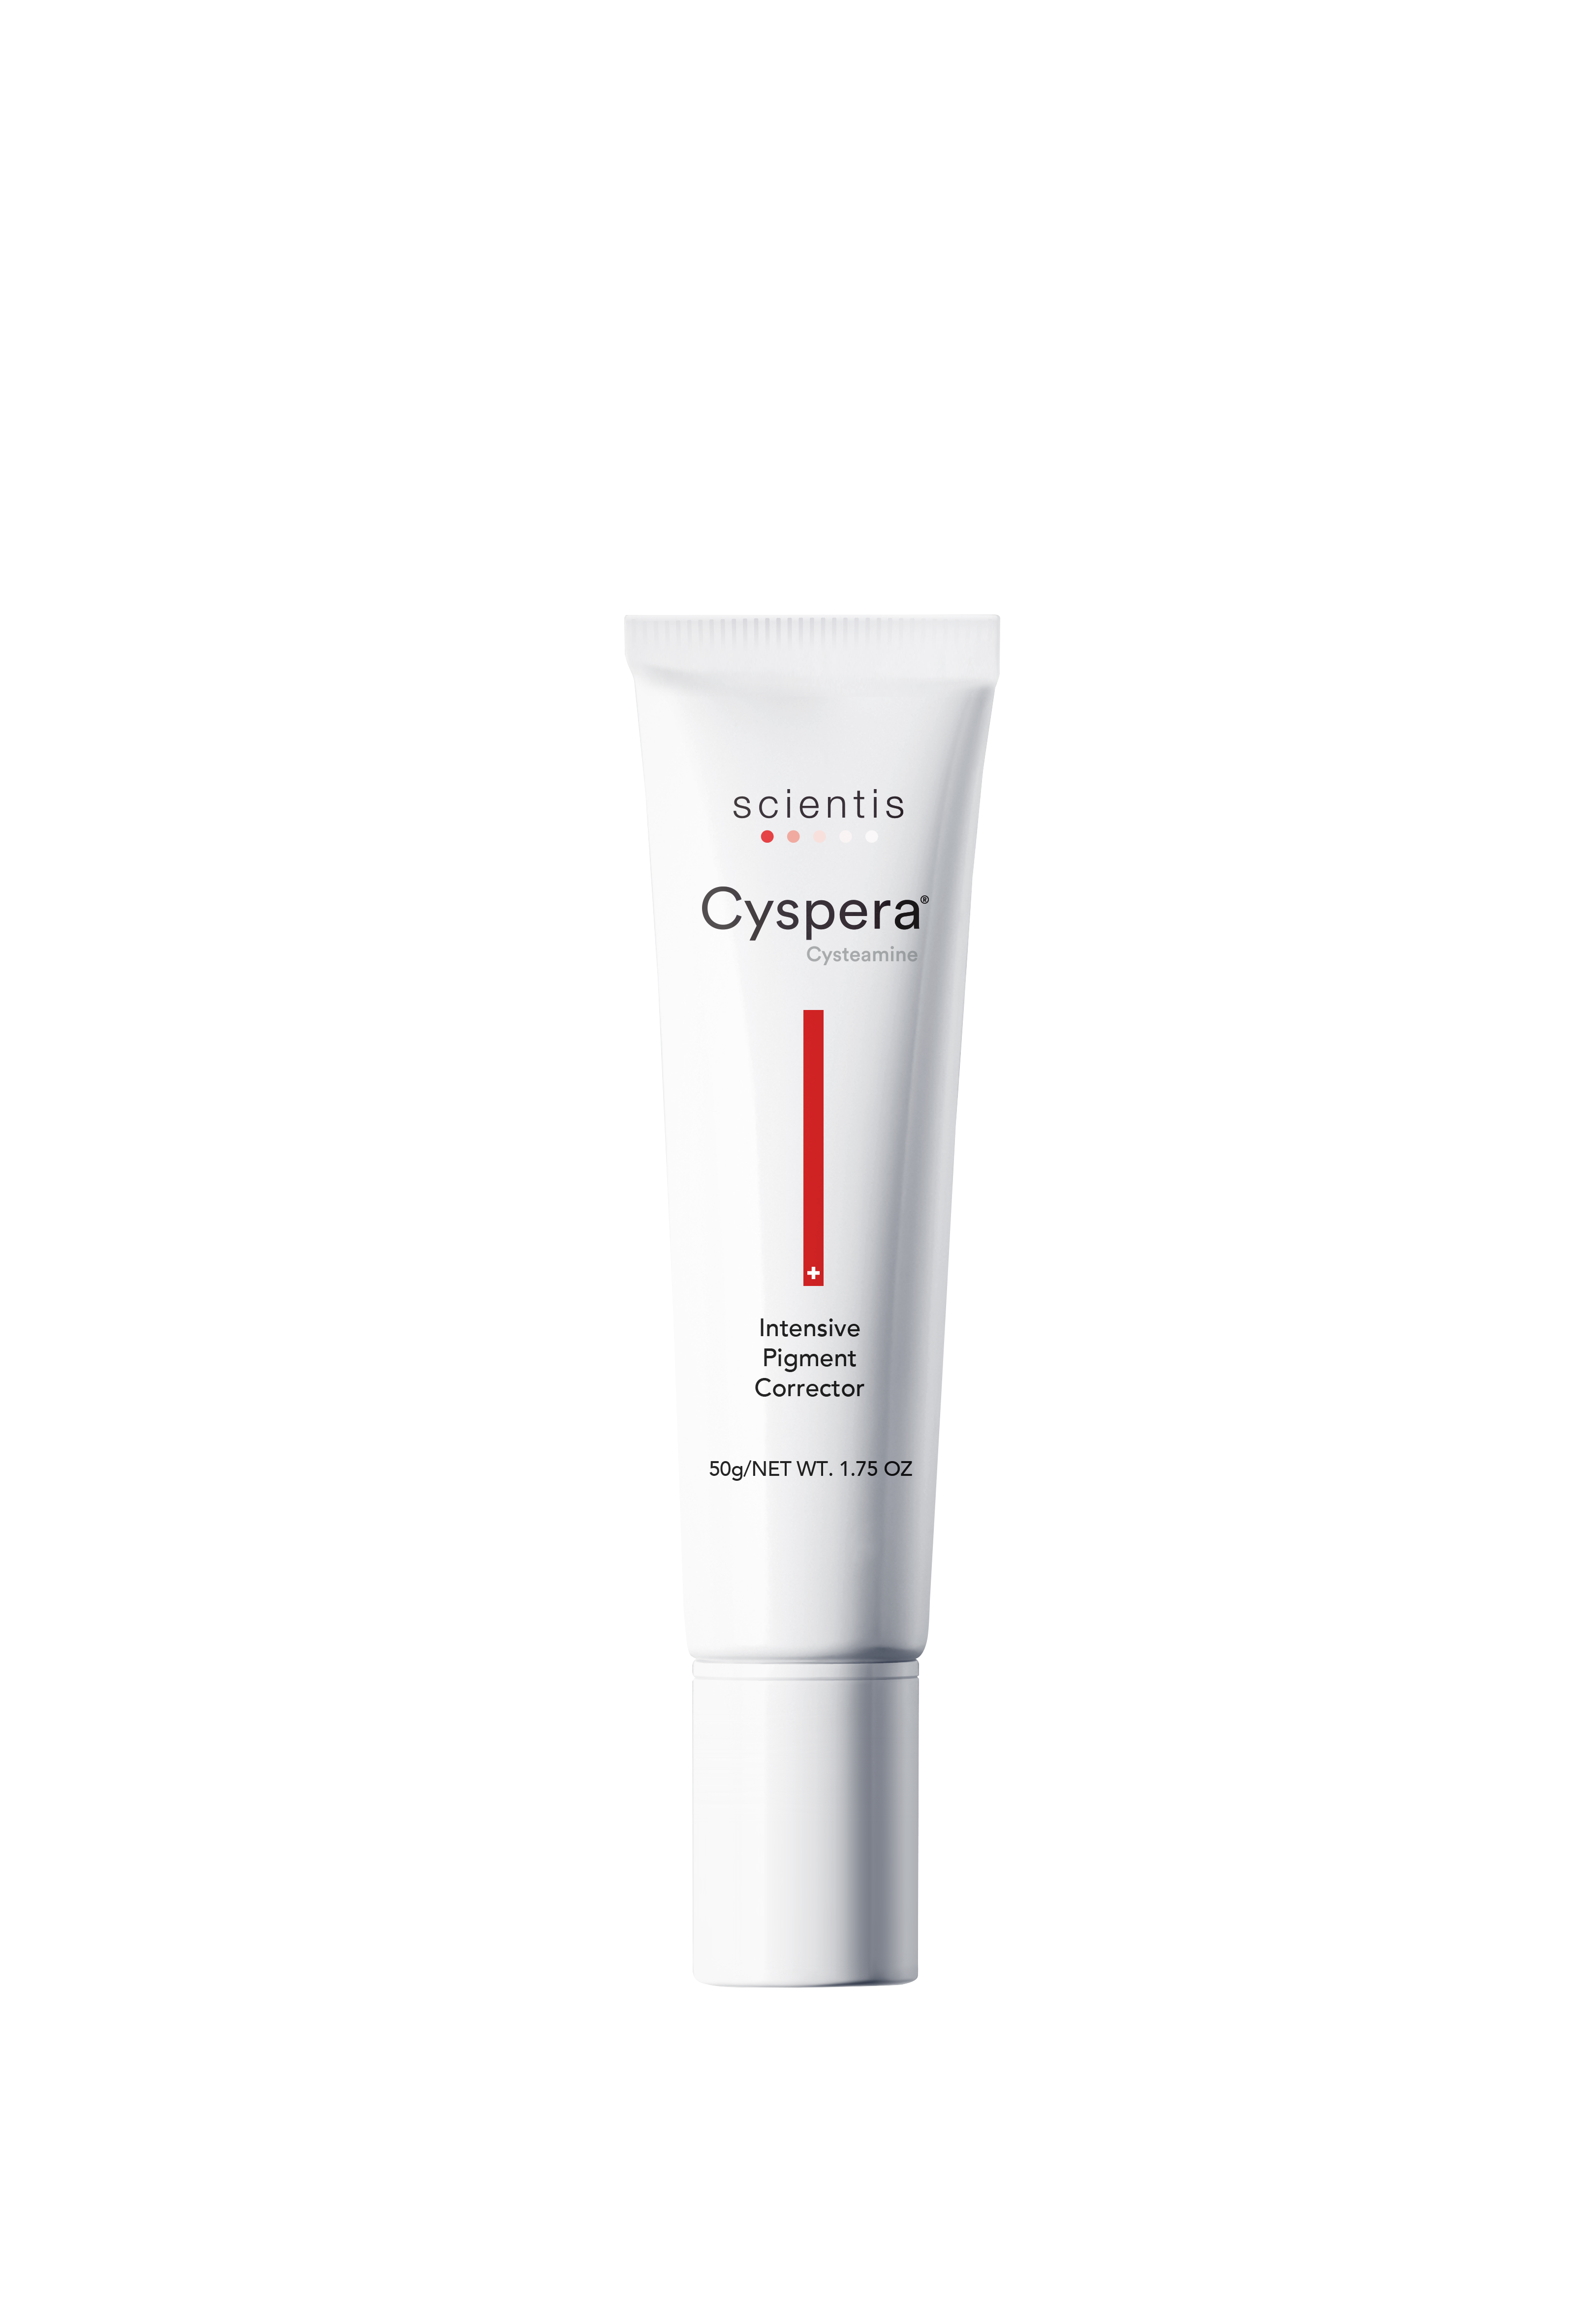 Cyspera available at Dr Cindy's Medical Aesthetics